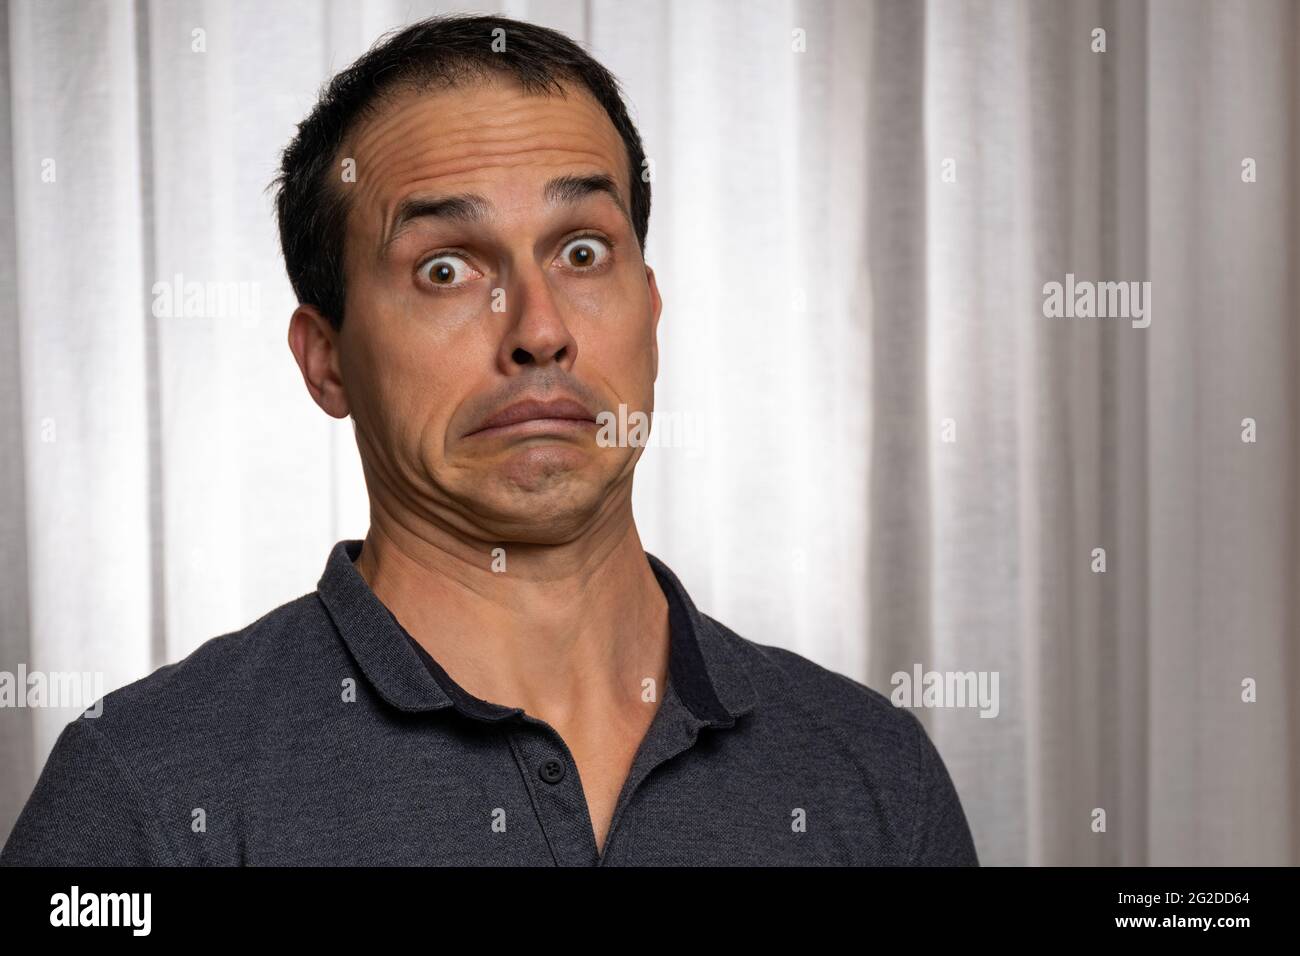 Mature man (44 years old) in photo session with dark blue polo shirt, making several faces. Stock Photo